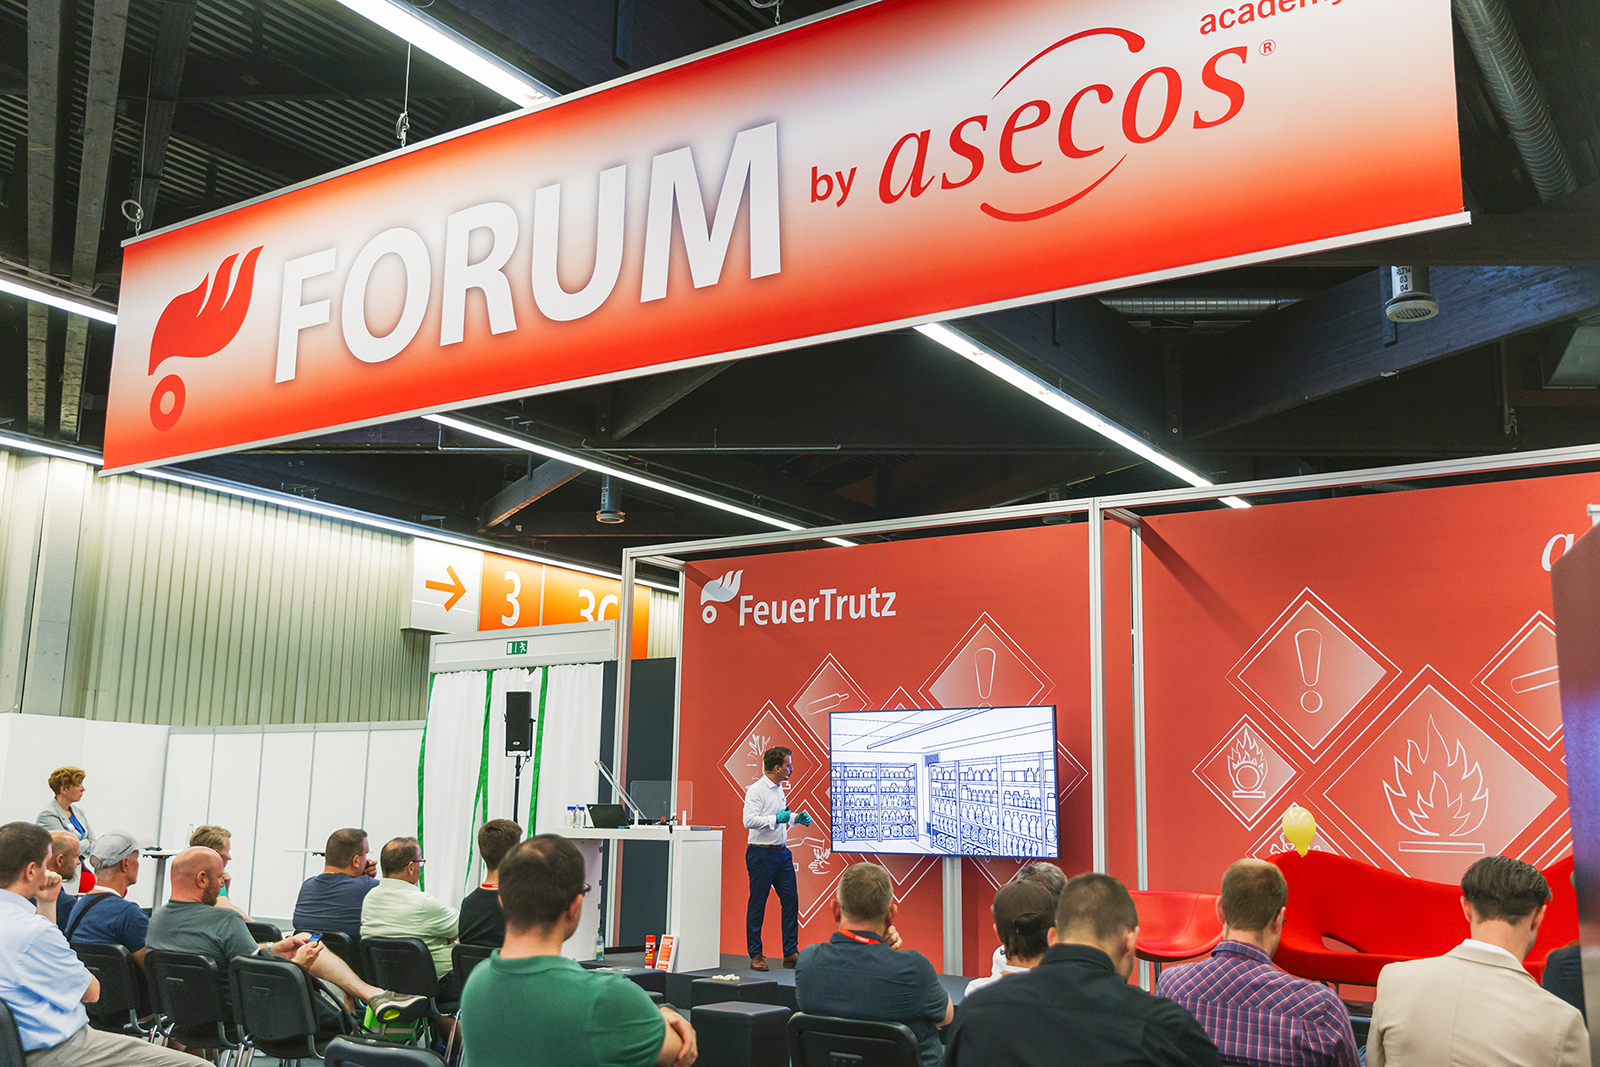 Forum by asecos academy